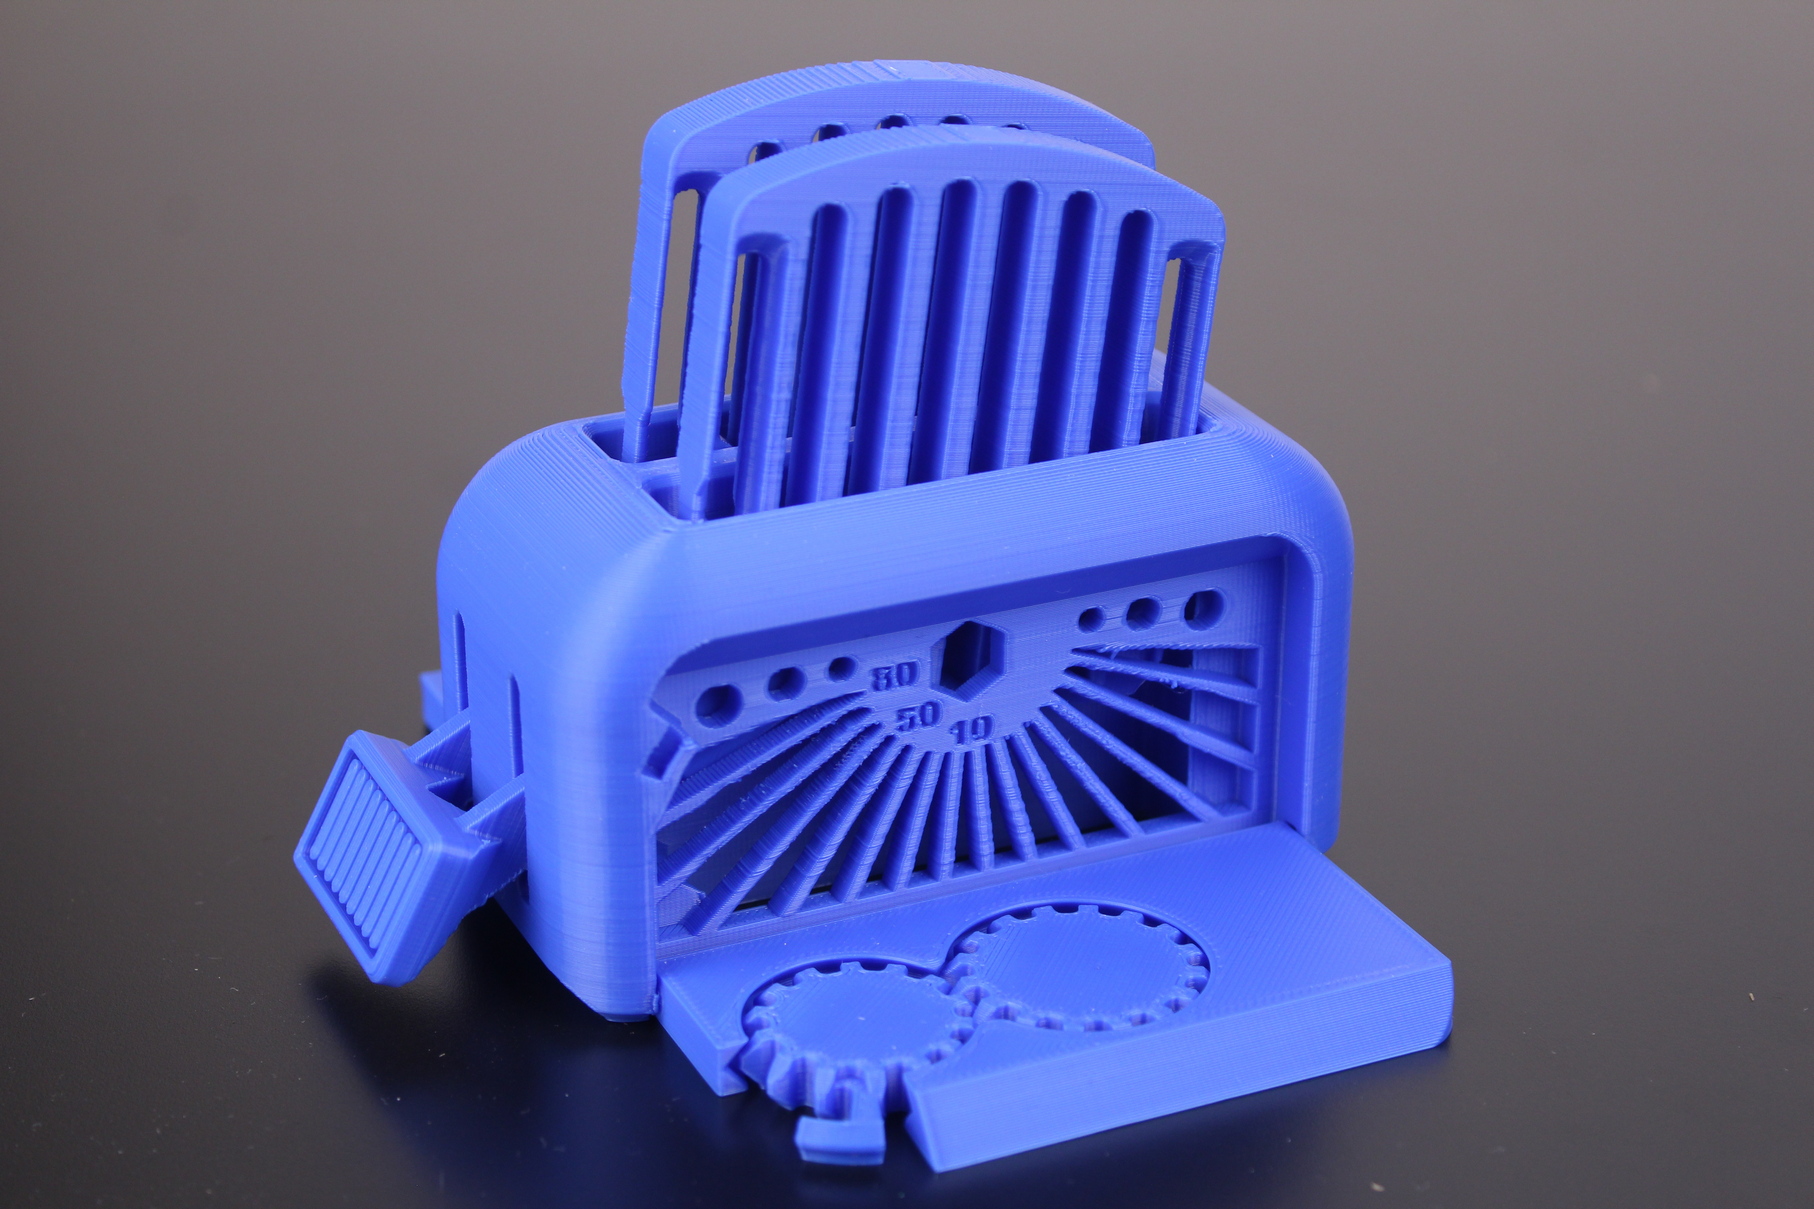 Torture Toaster printed on Voxelab Aries 2 | Voxelab Aries Review: A Worthy Upgrade for the Aquila?